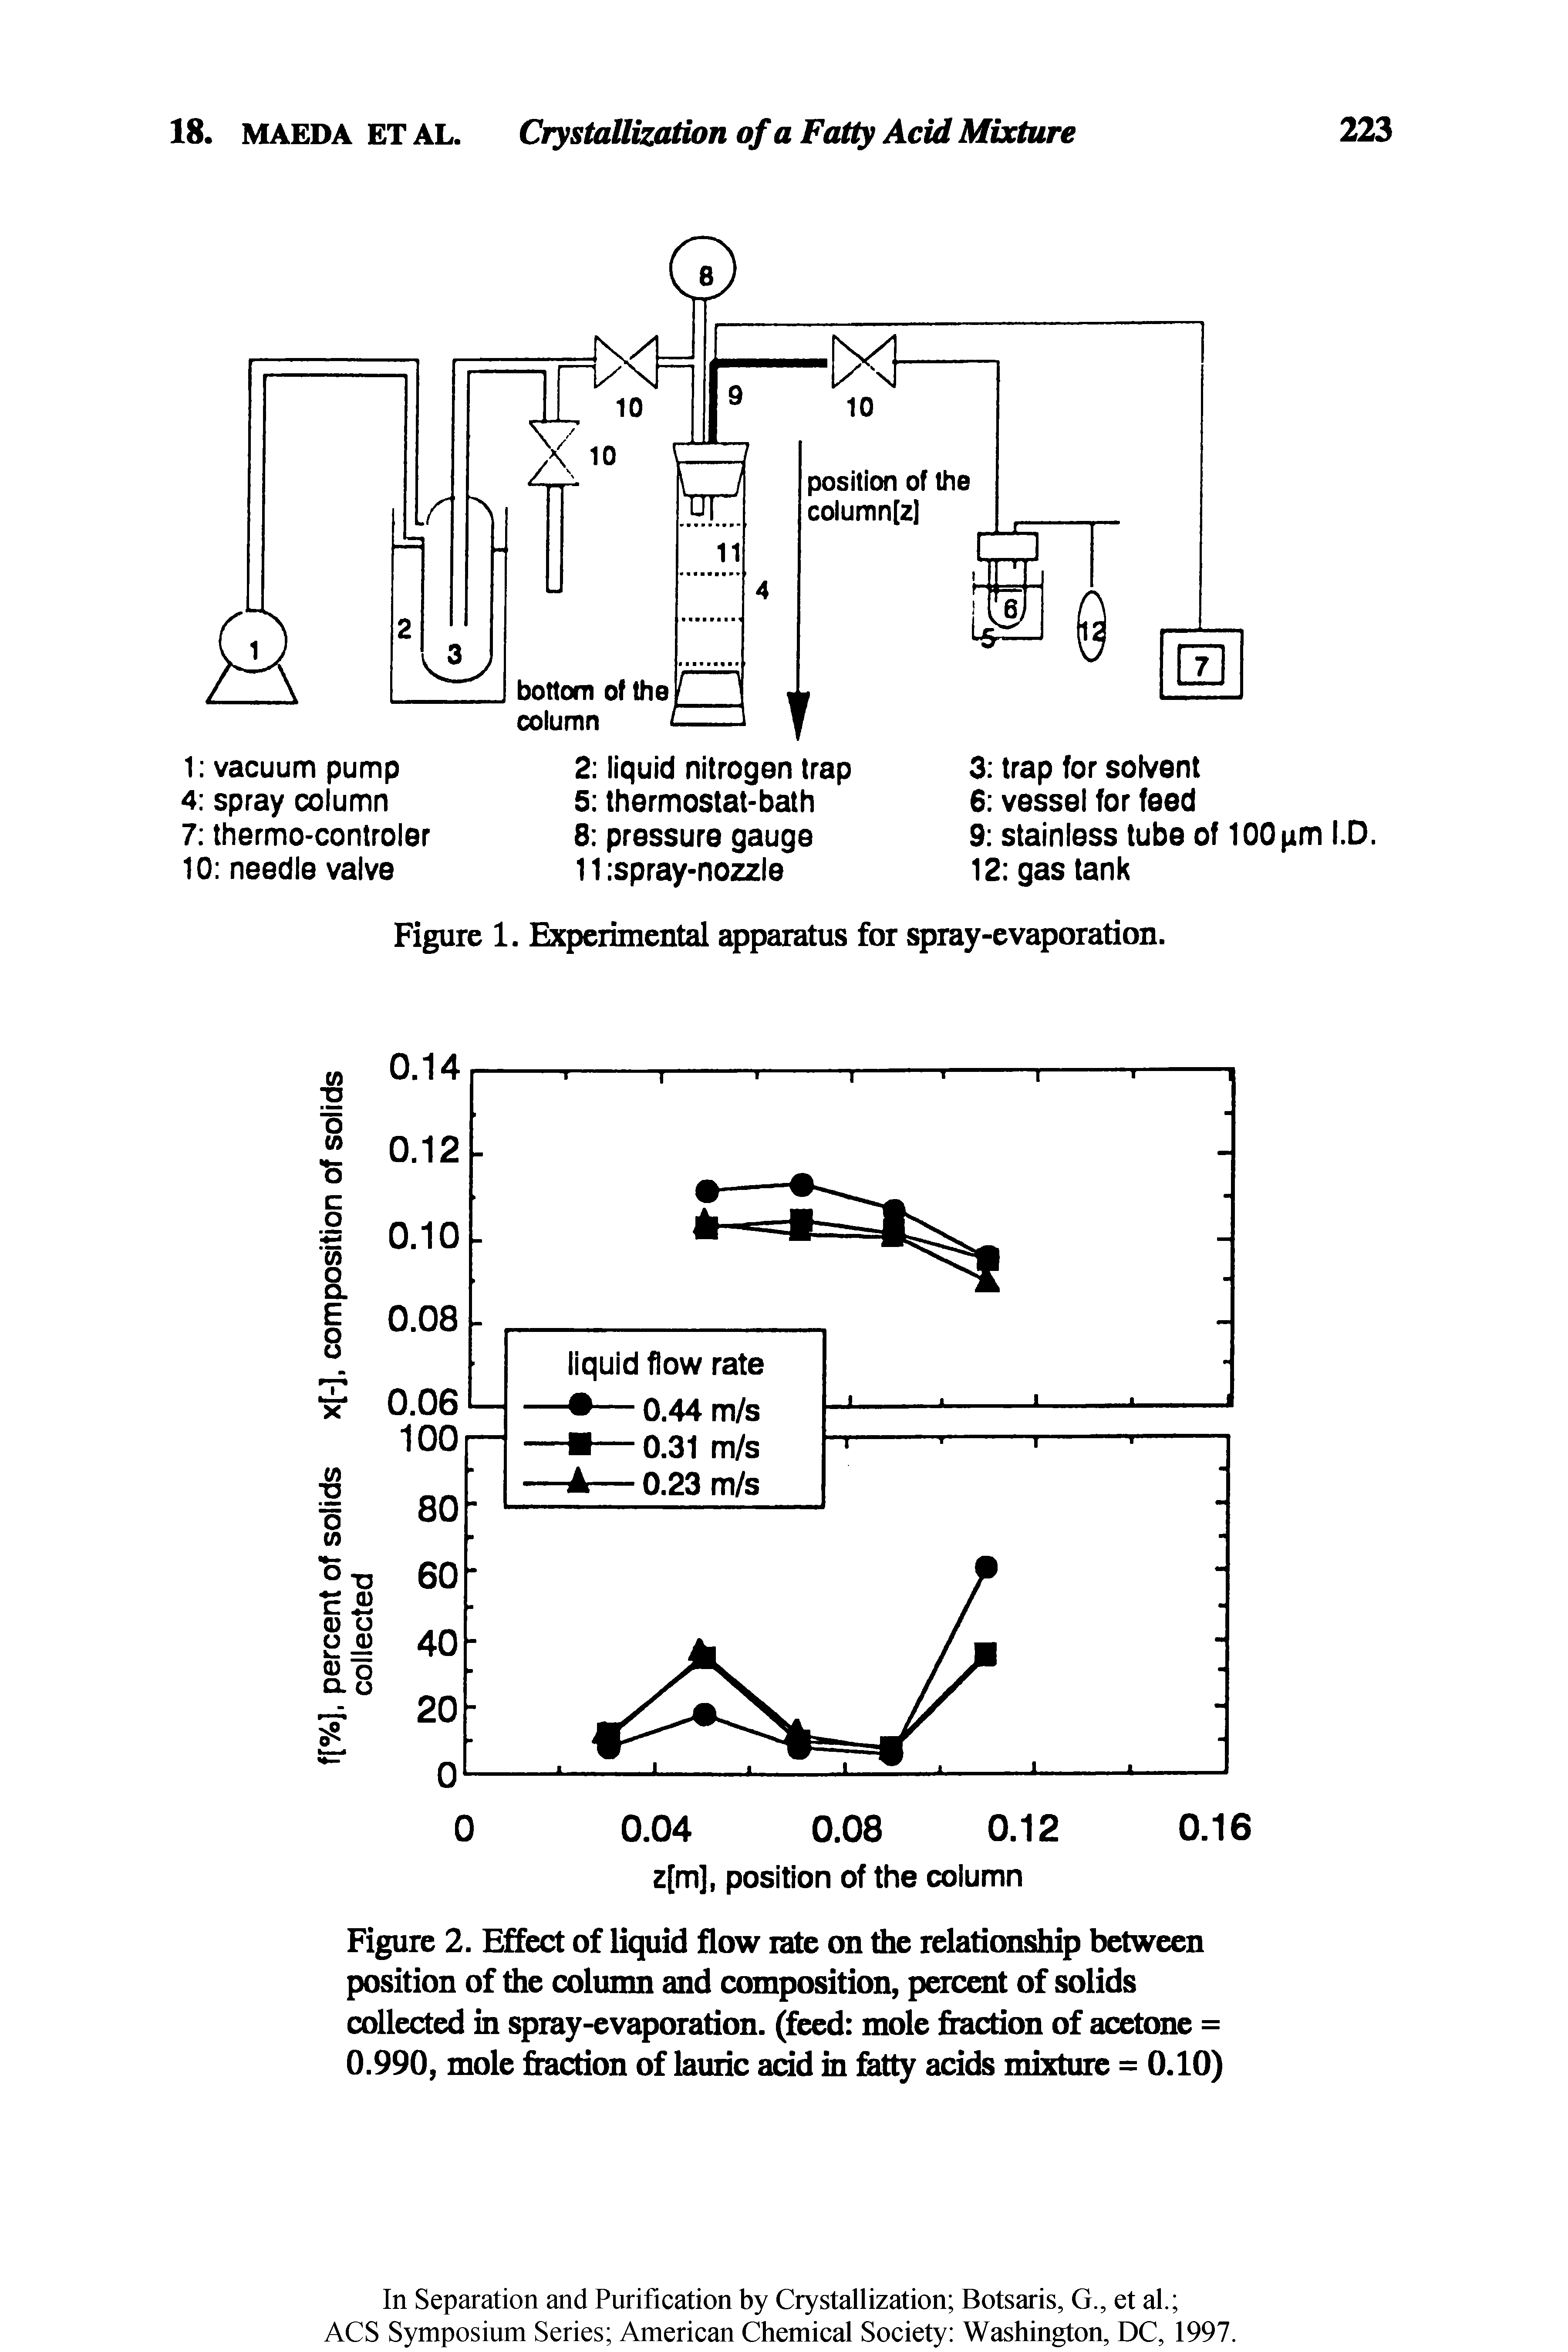 Figure 2. Effect of liquid flow rate on the relationship between position of the column and composition, percent of solids collected in spray-evaporation, (feed mole fraction of acetone = 0.990, mole fraction of lauric add in fatty acids mixture = 0.10)...